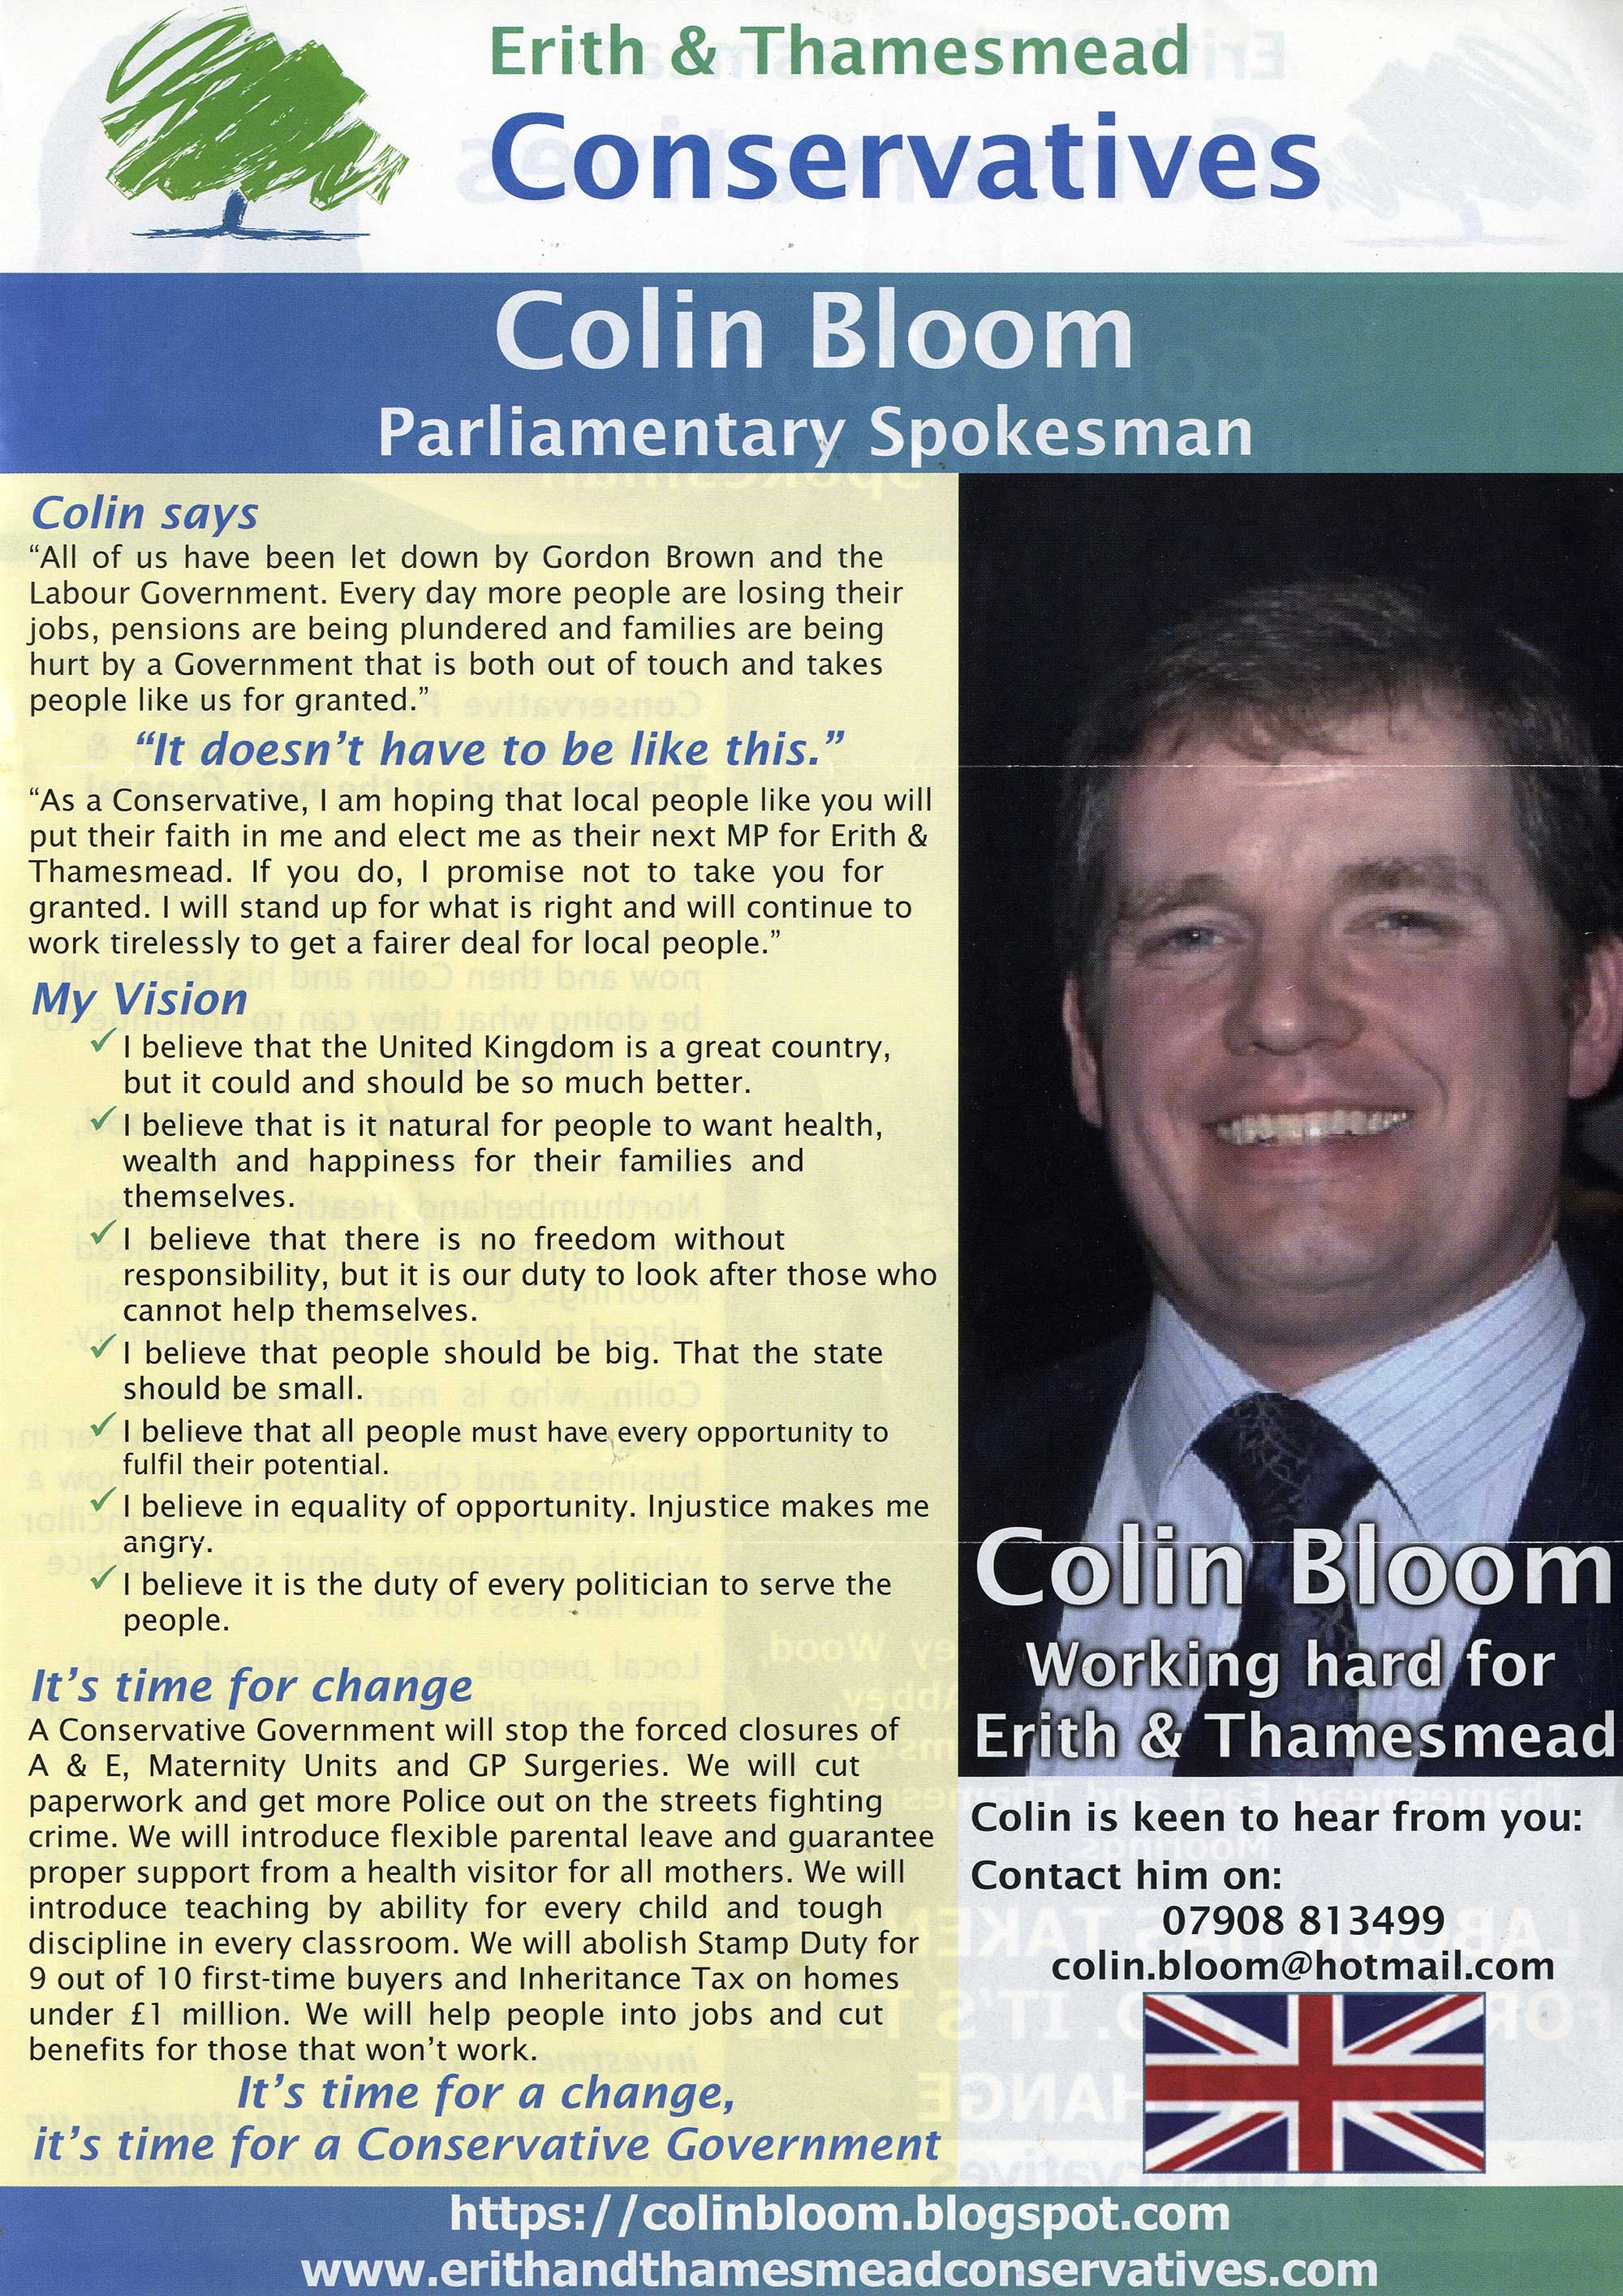 Colin Bloom's election paper